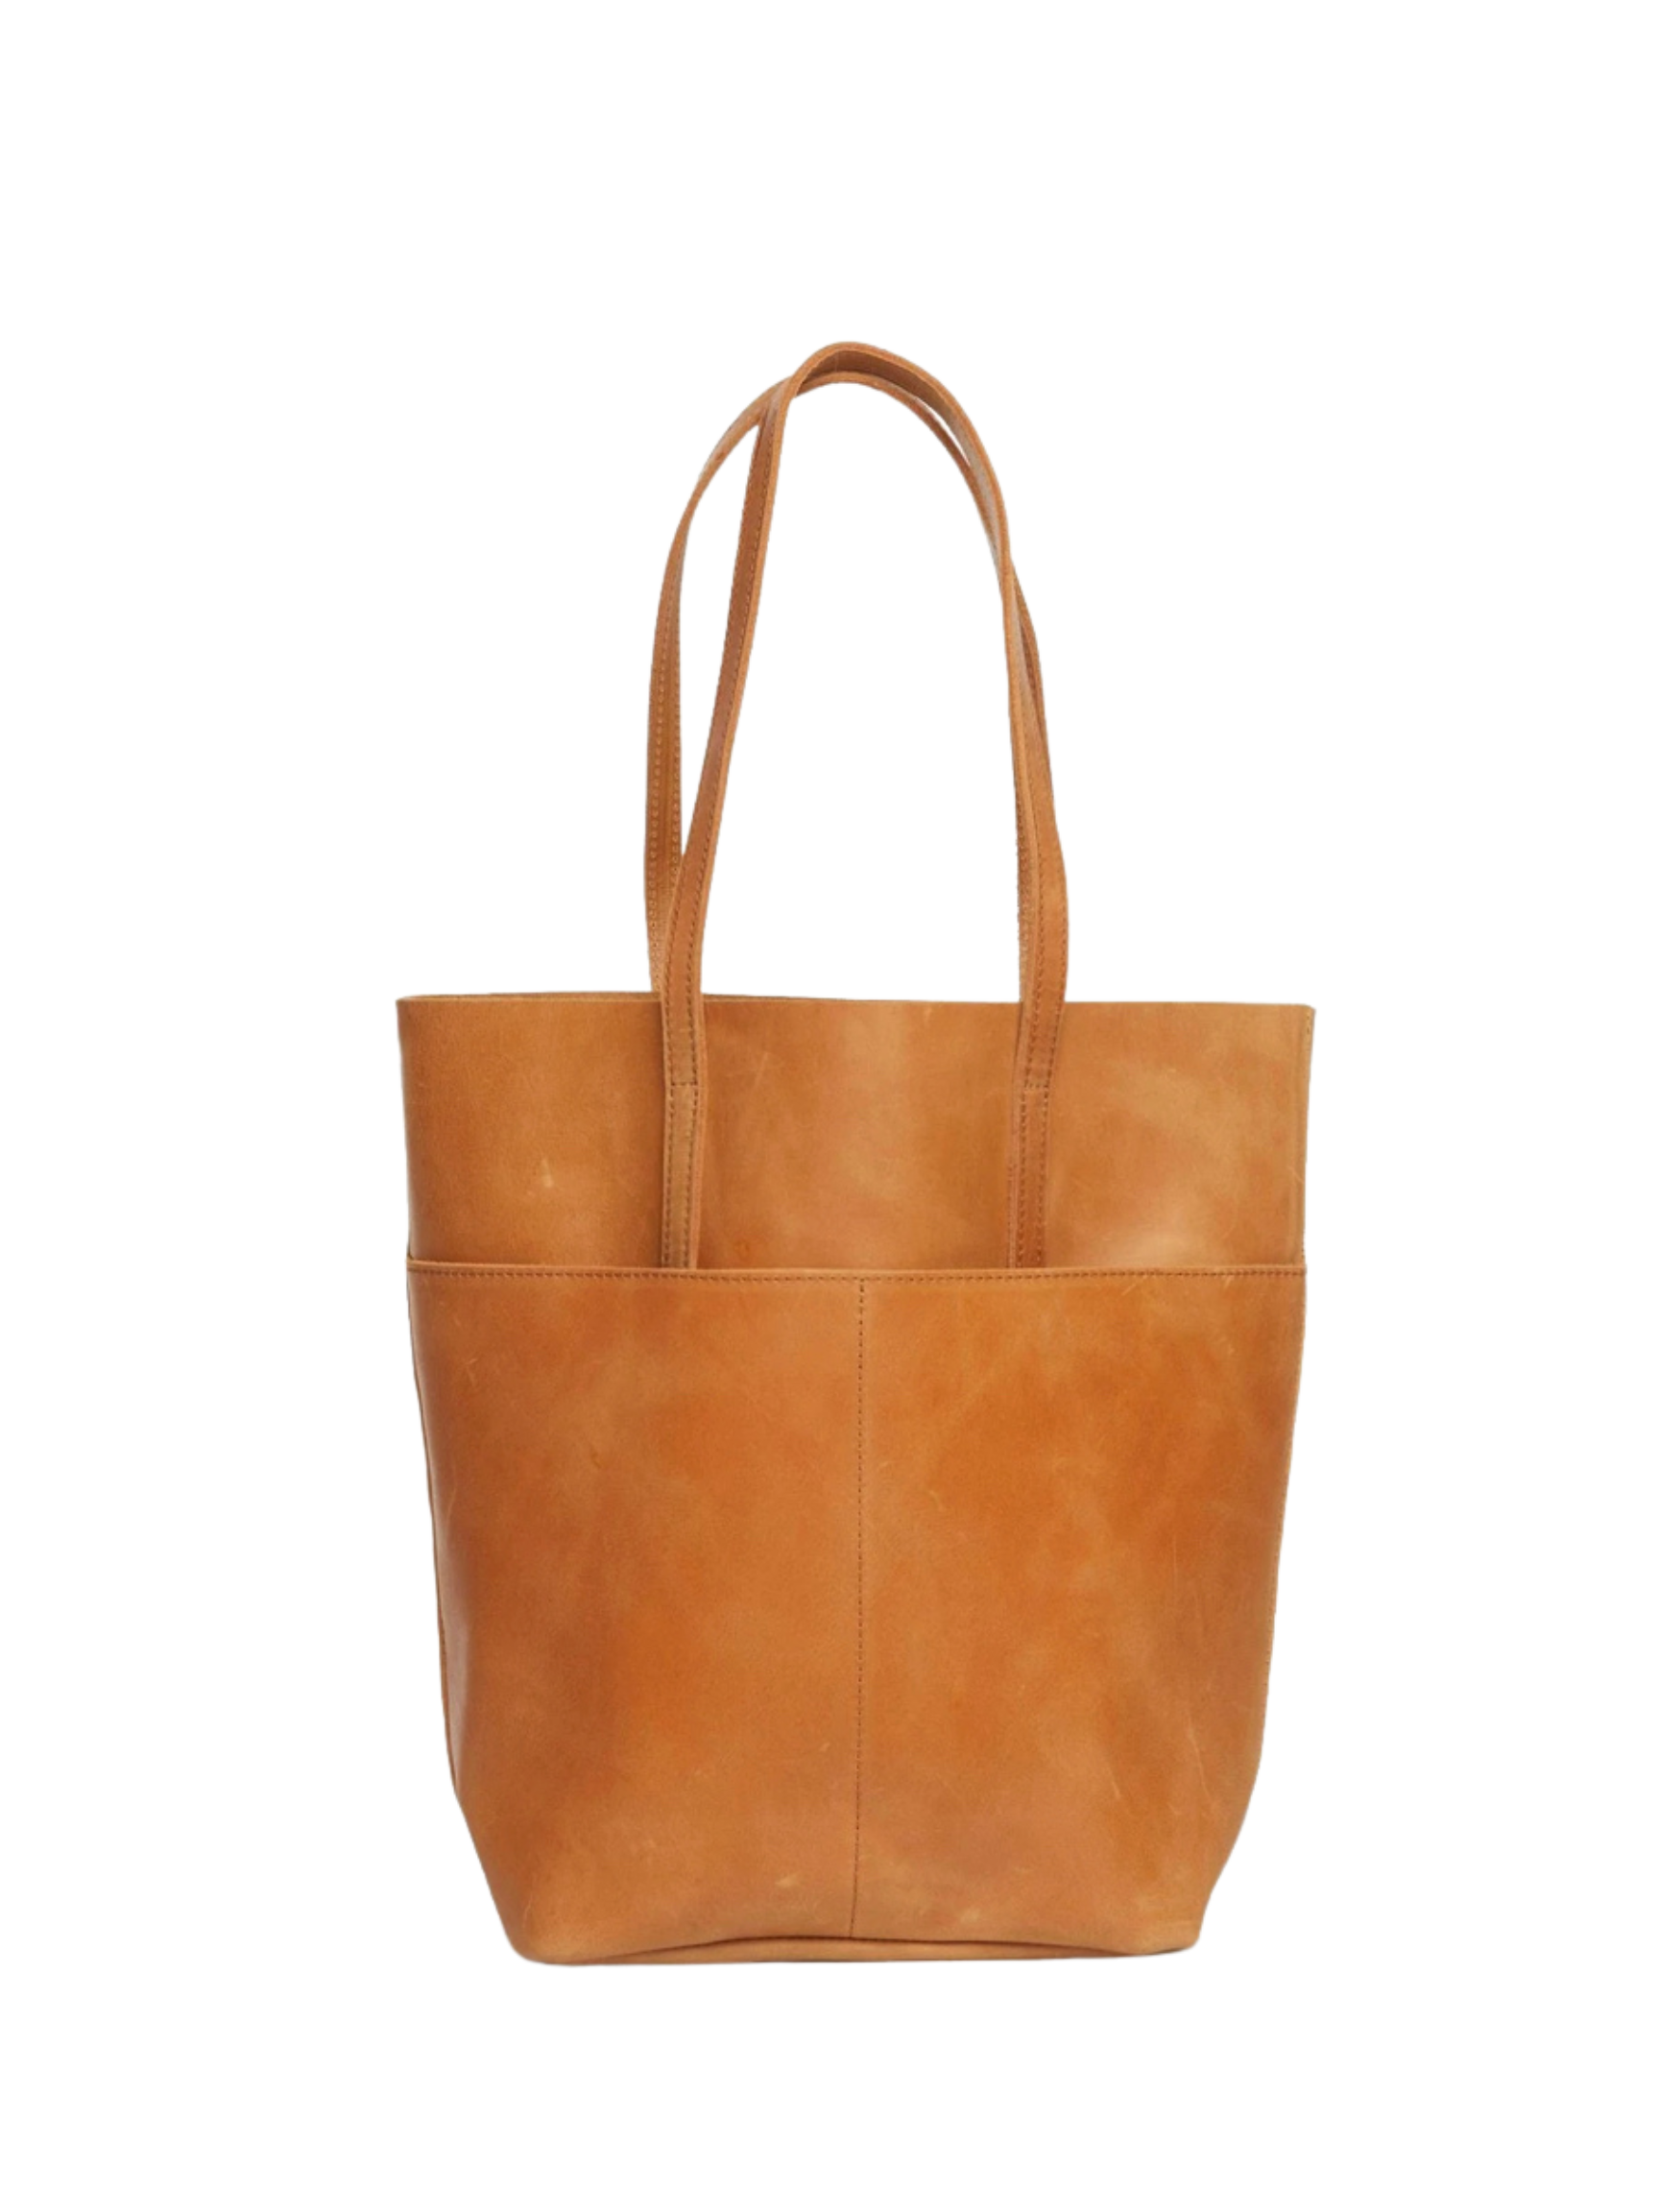 Able Clothing's Selam Tote